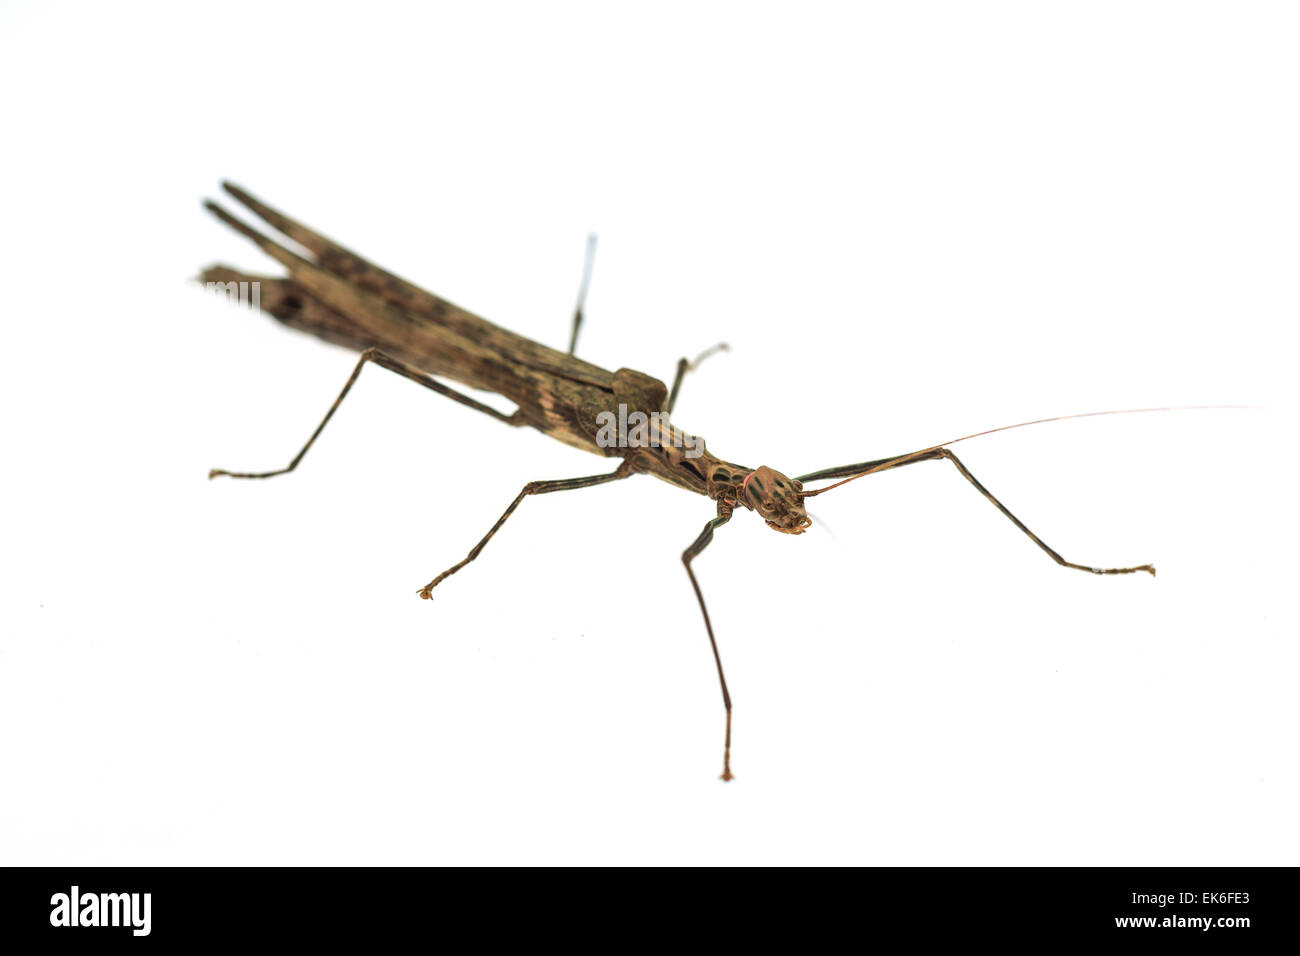 Big brown grasshopper isolated on white background Stock Photo